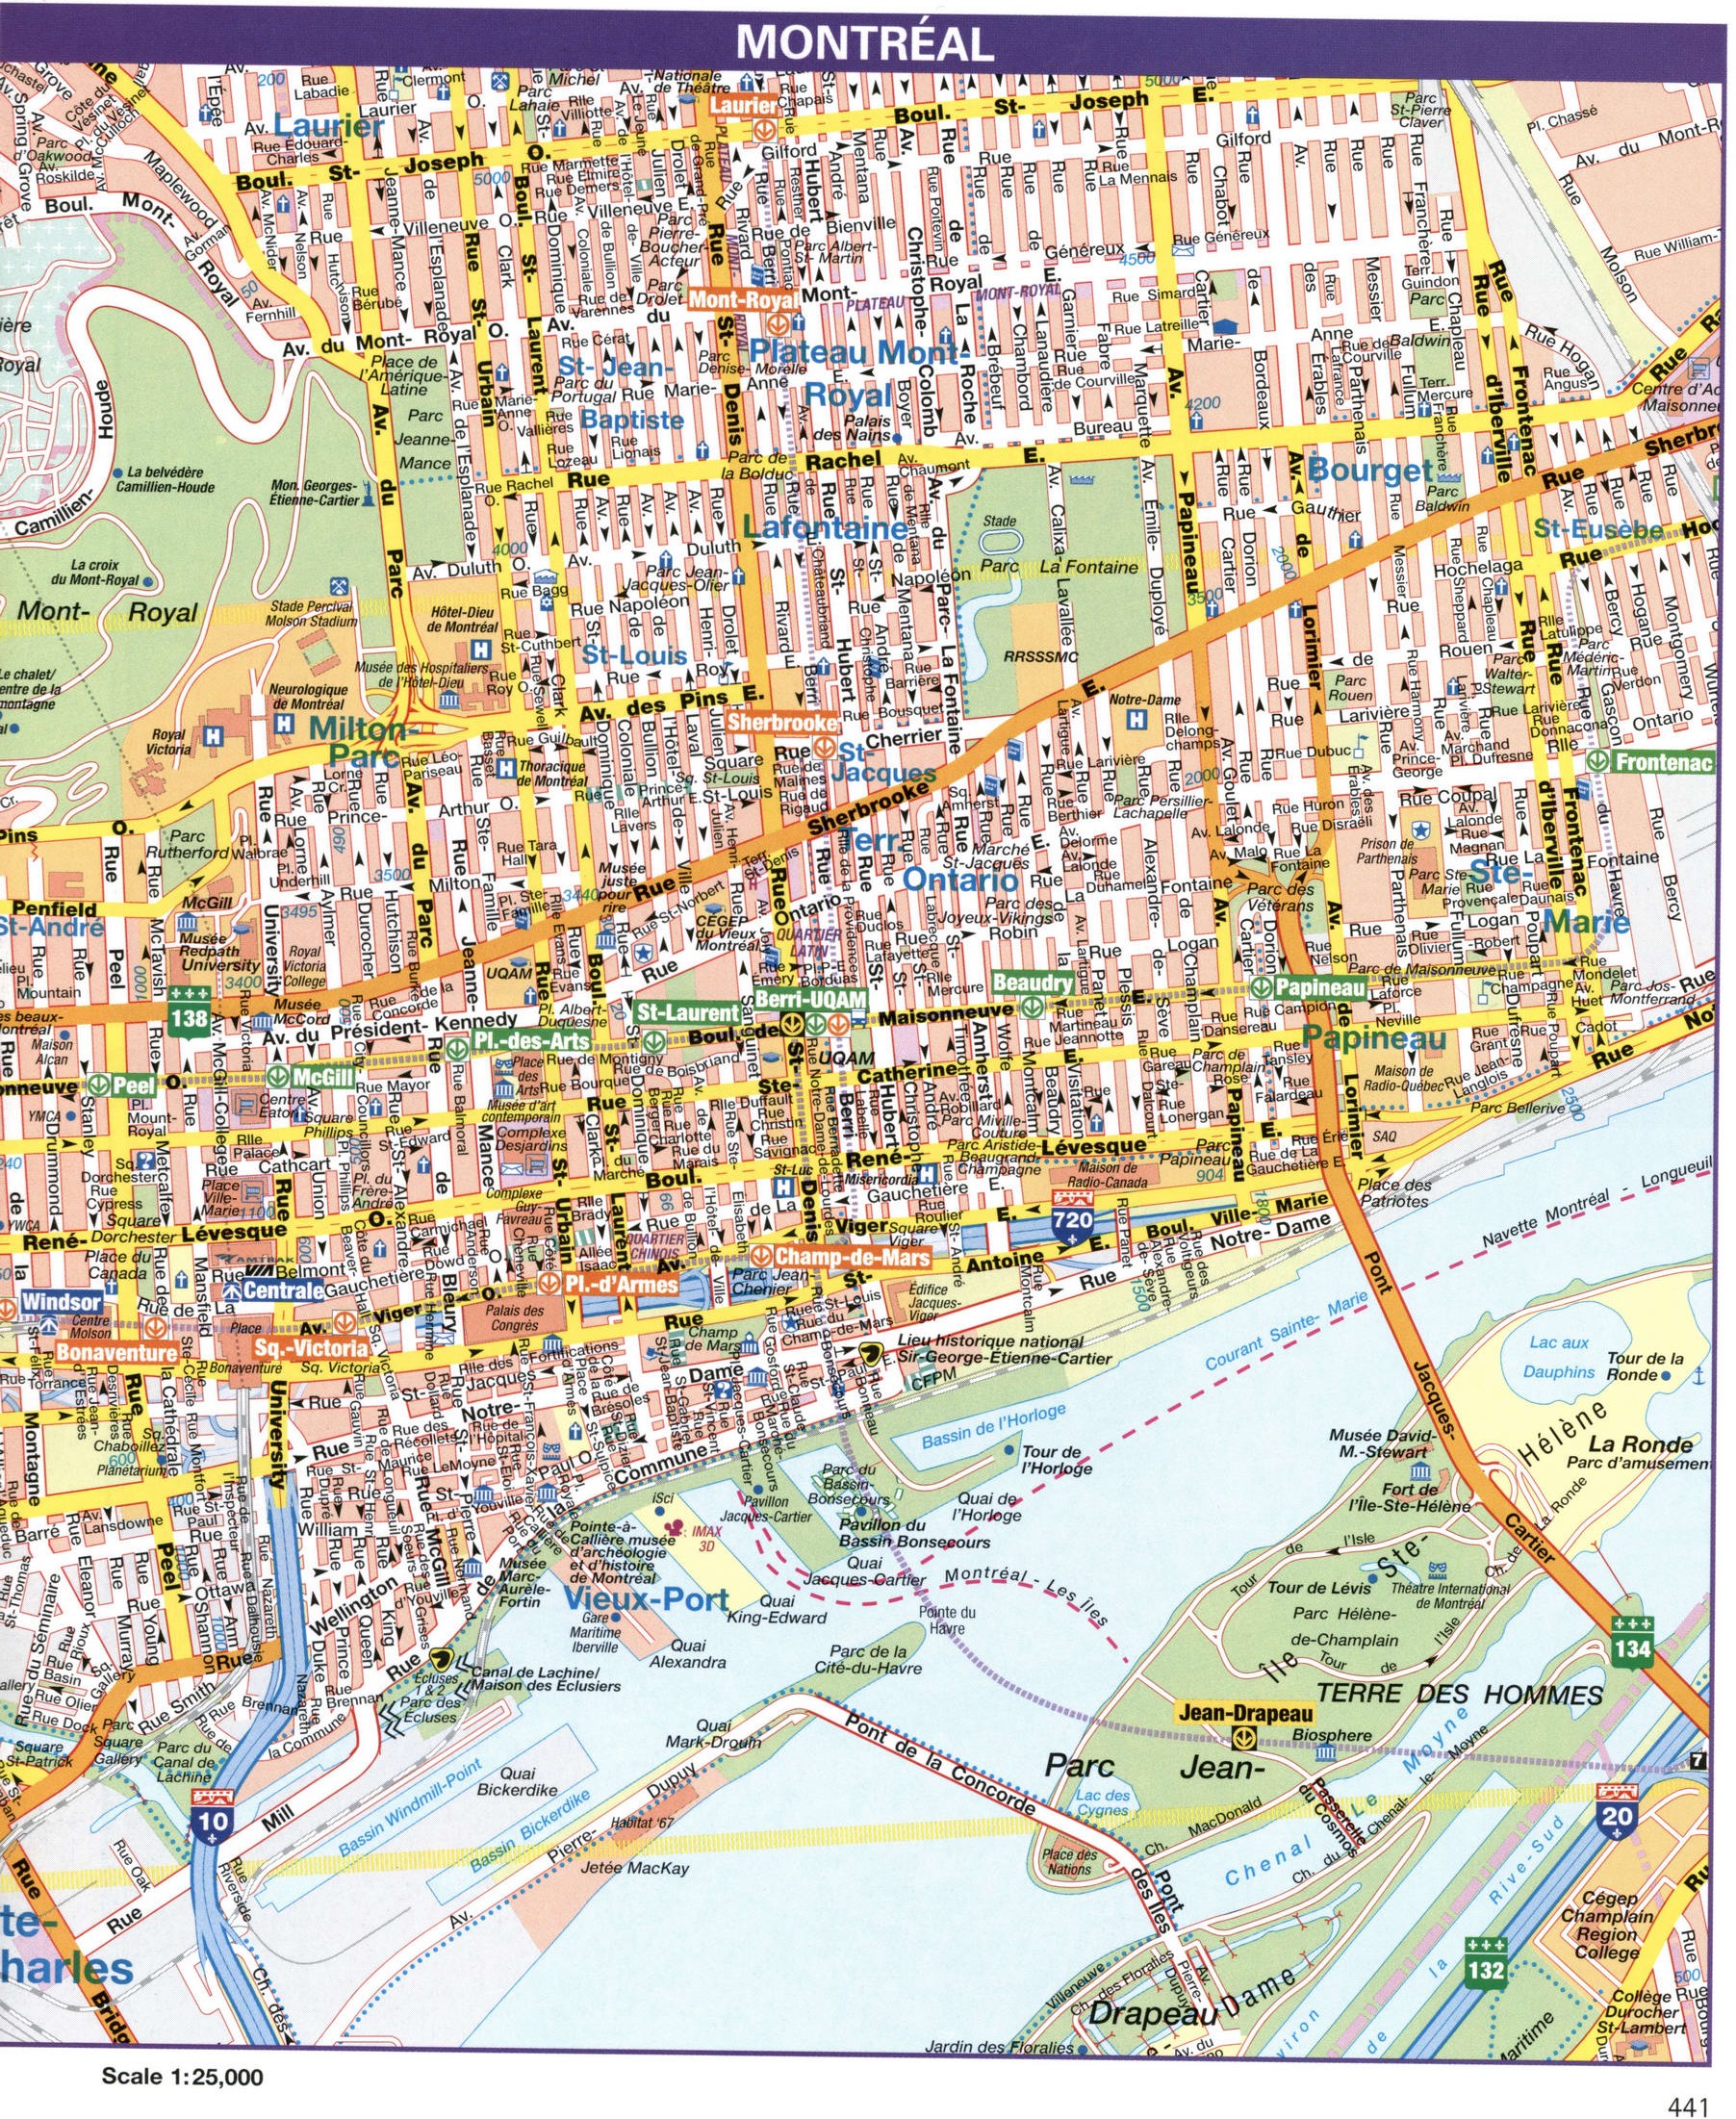 Montreal city map, Canada